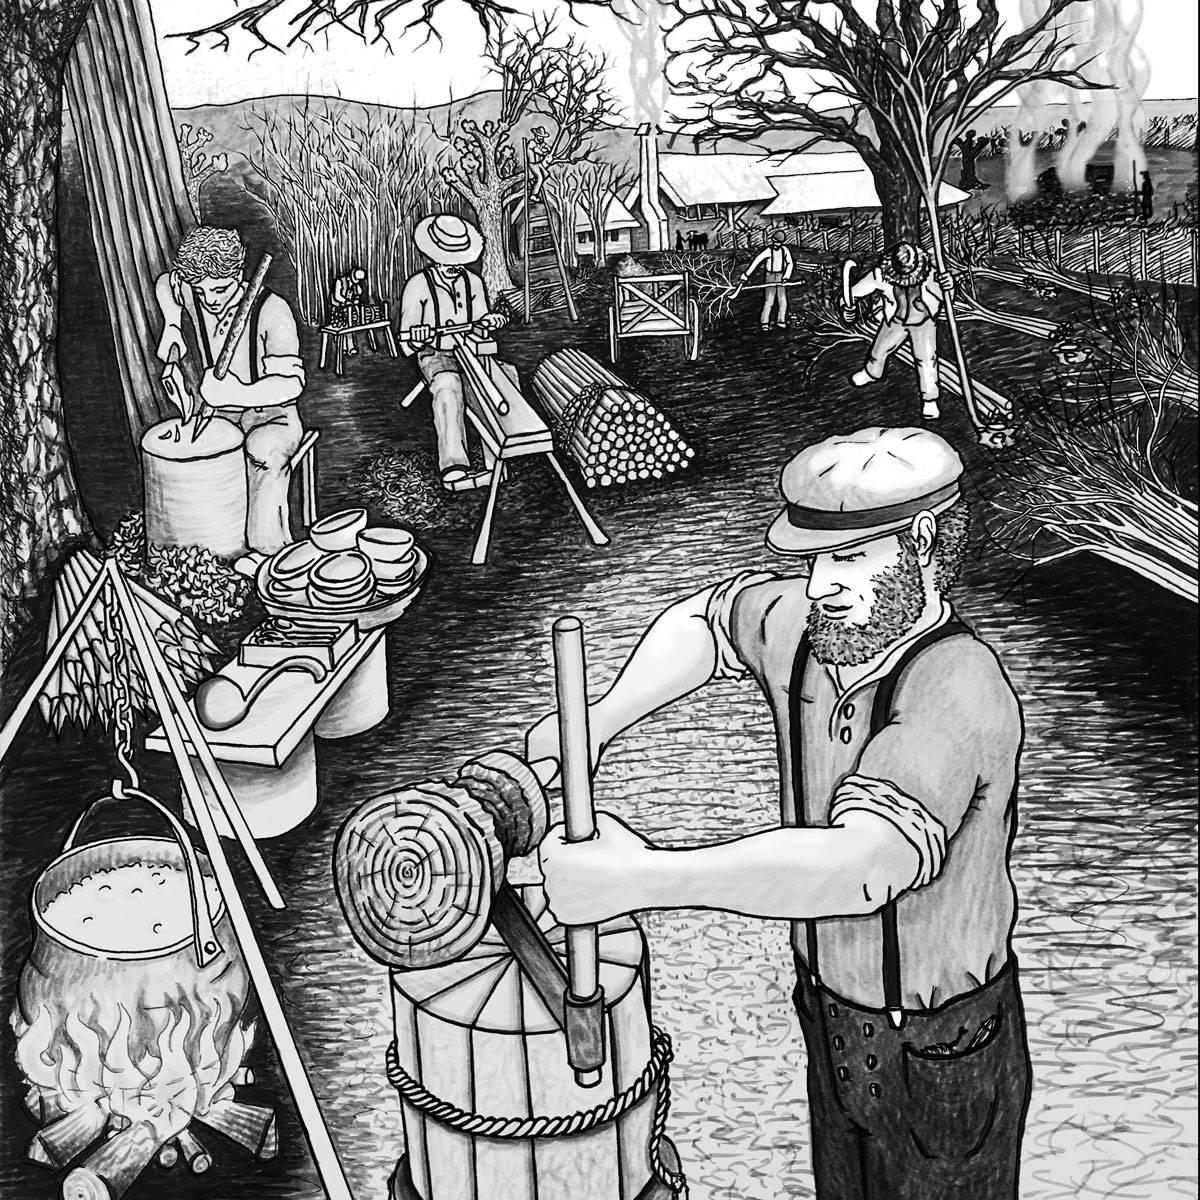 A pen and ink illustration showing traditional woodland work in a village